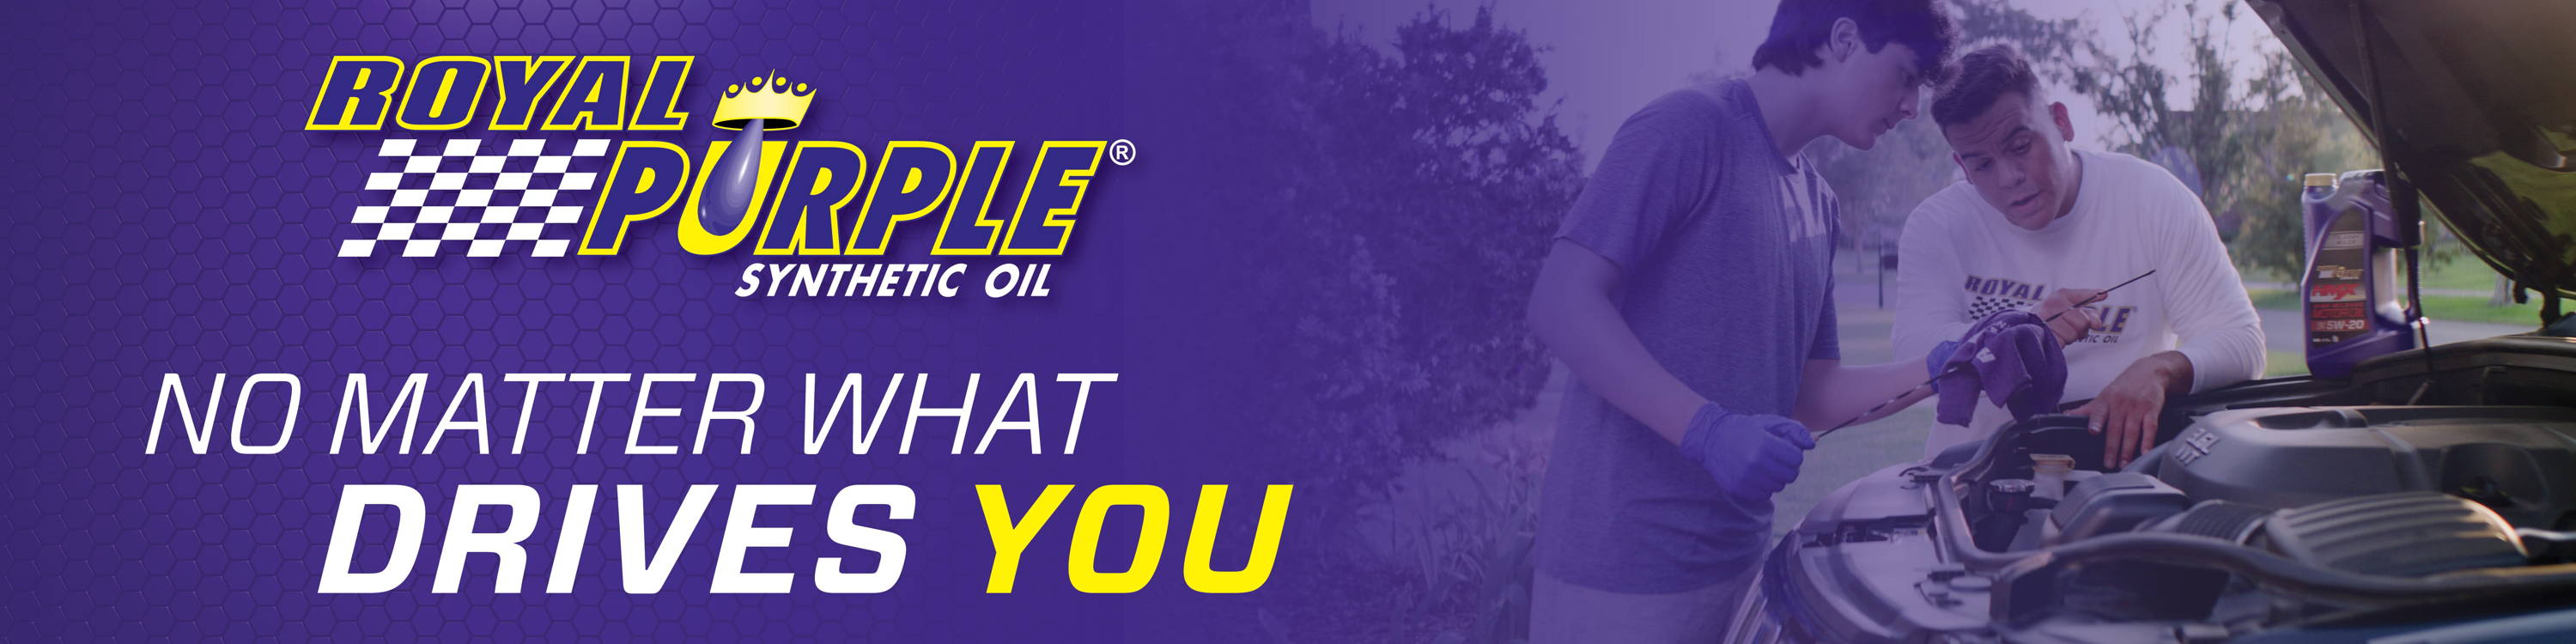 royal purple synthetic oil no matter what drives your